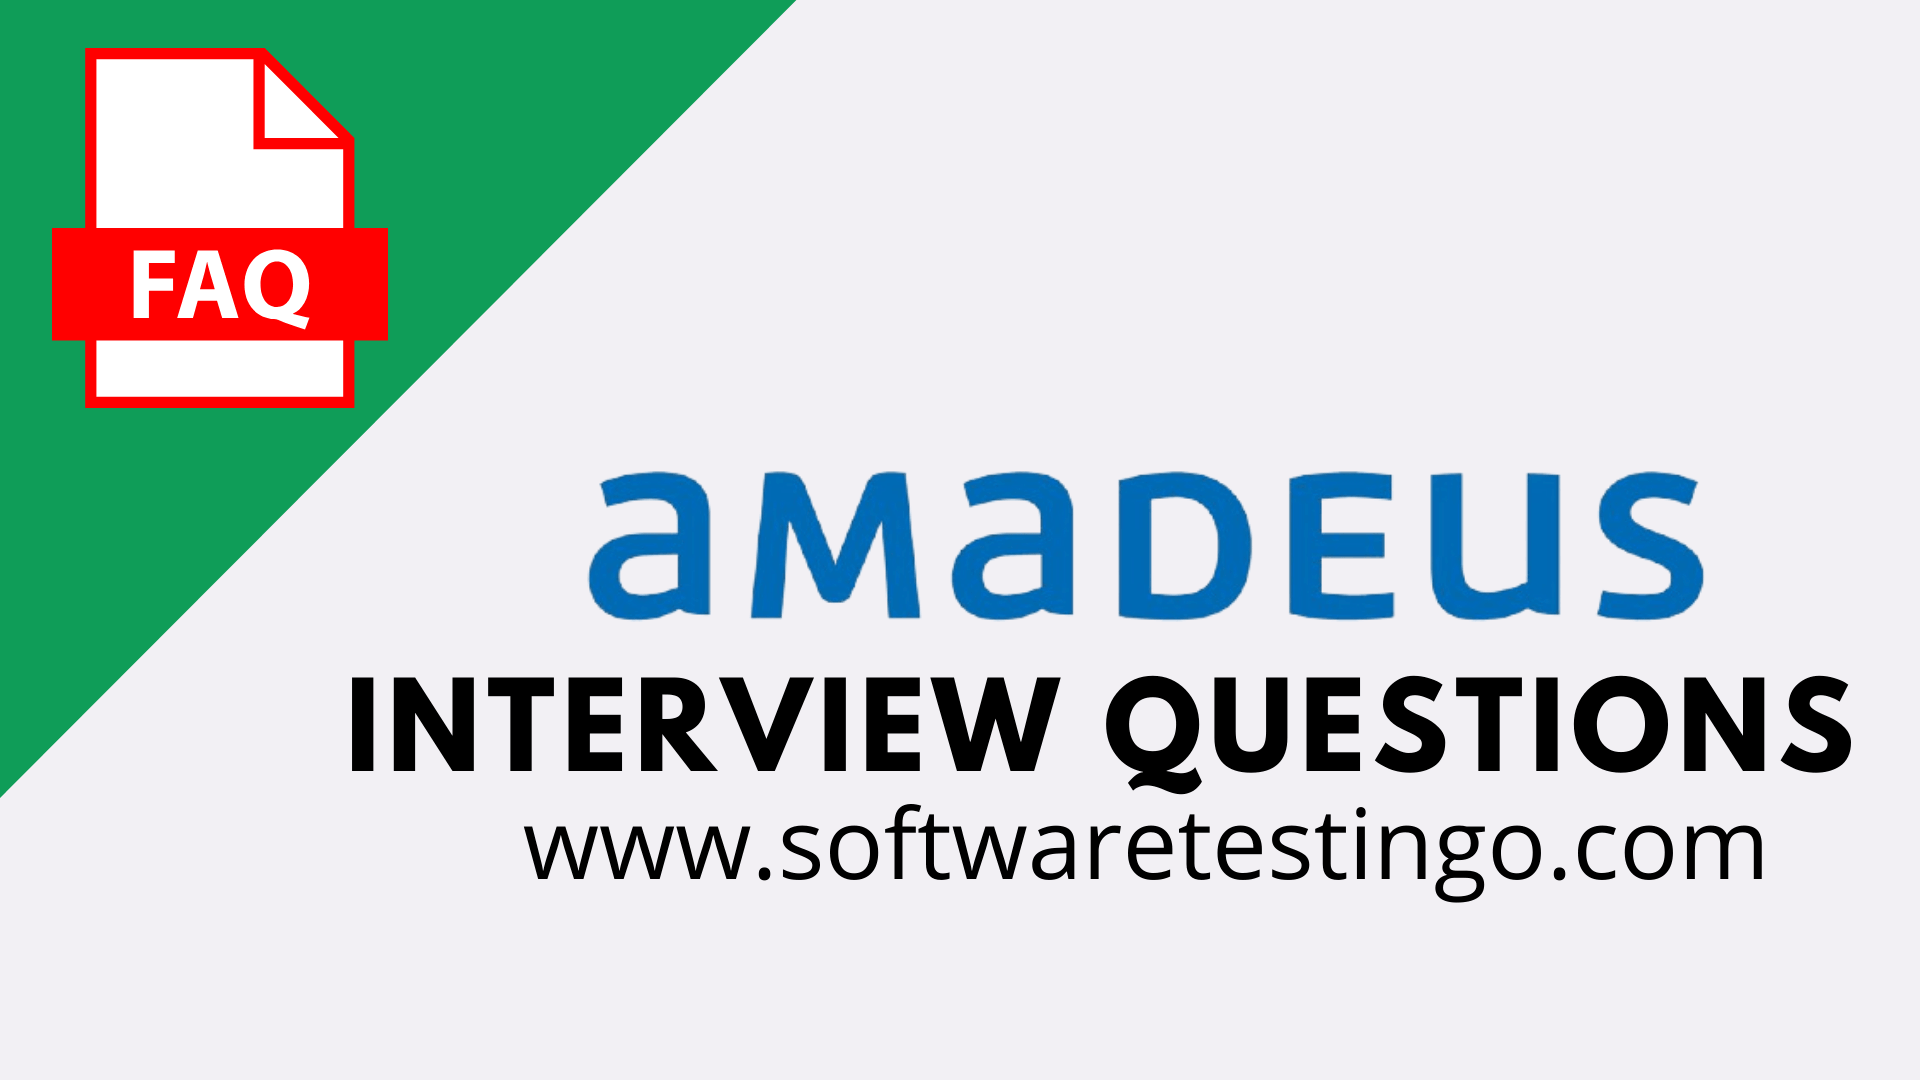 Firmware Engineer Interview Questions And Answers